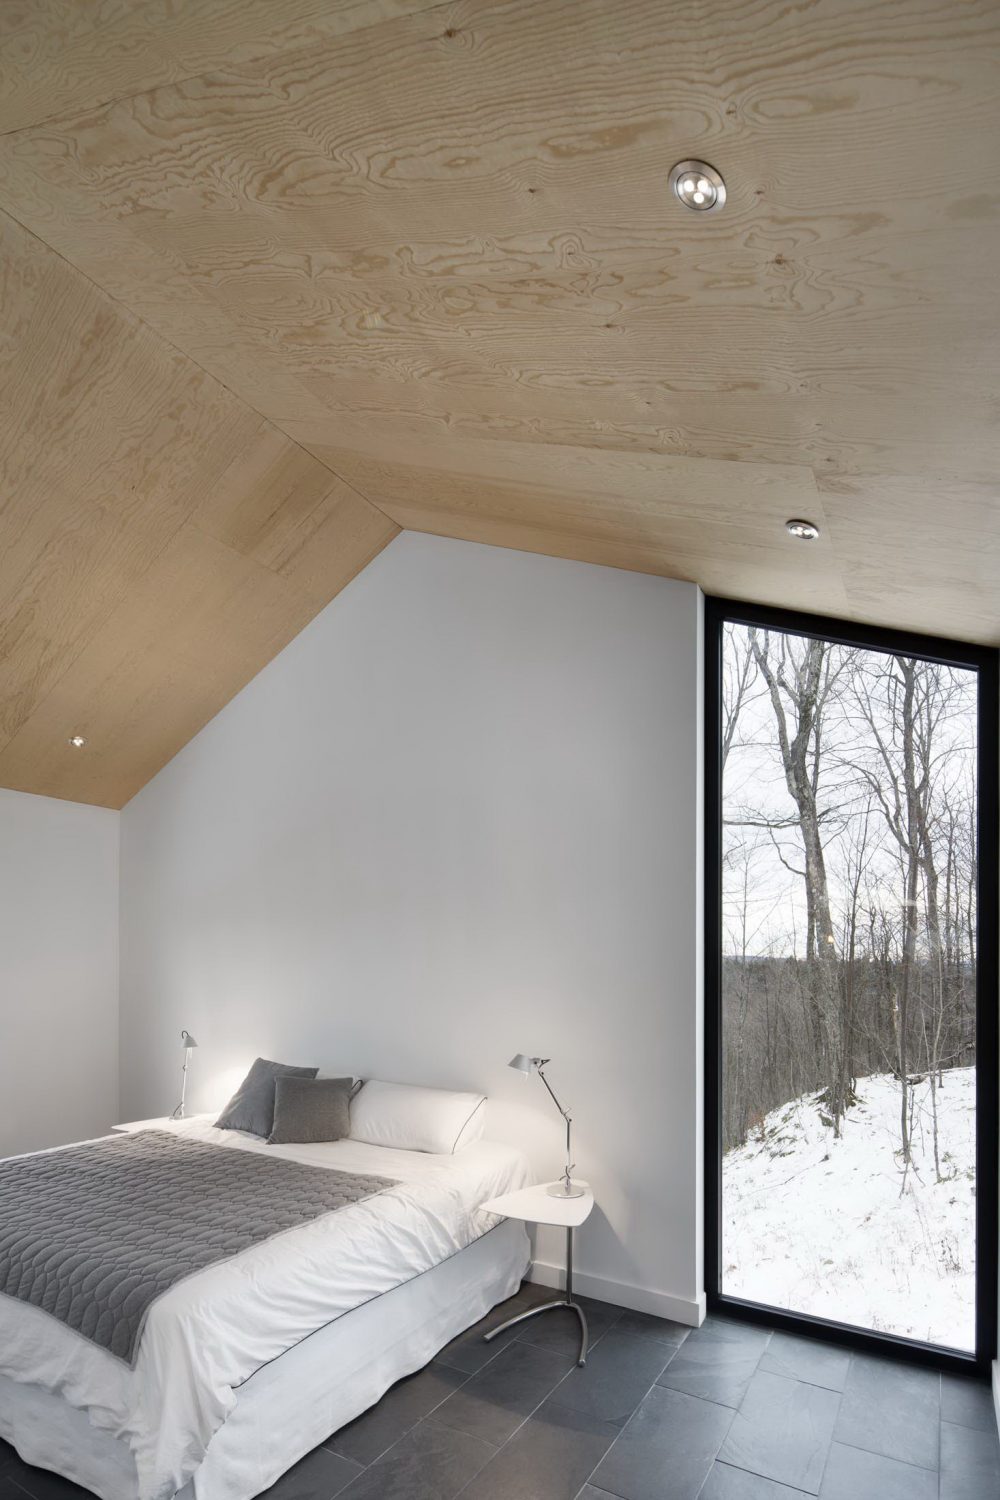 Bolton Residence by NatureHumaine